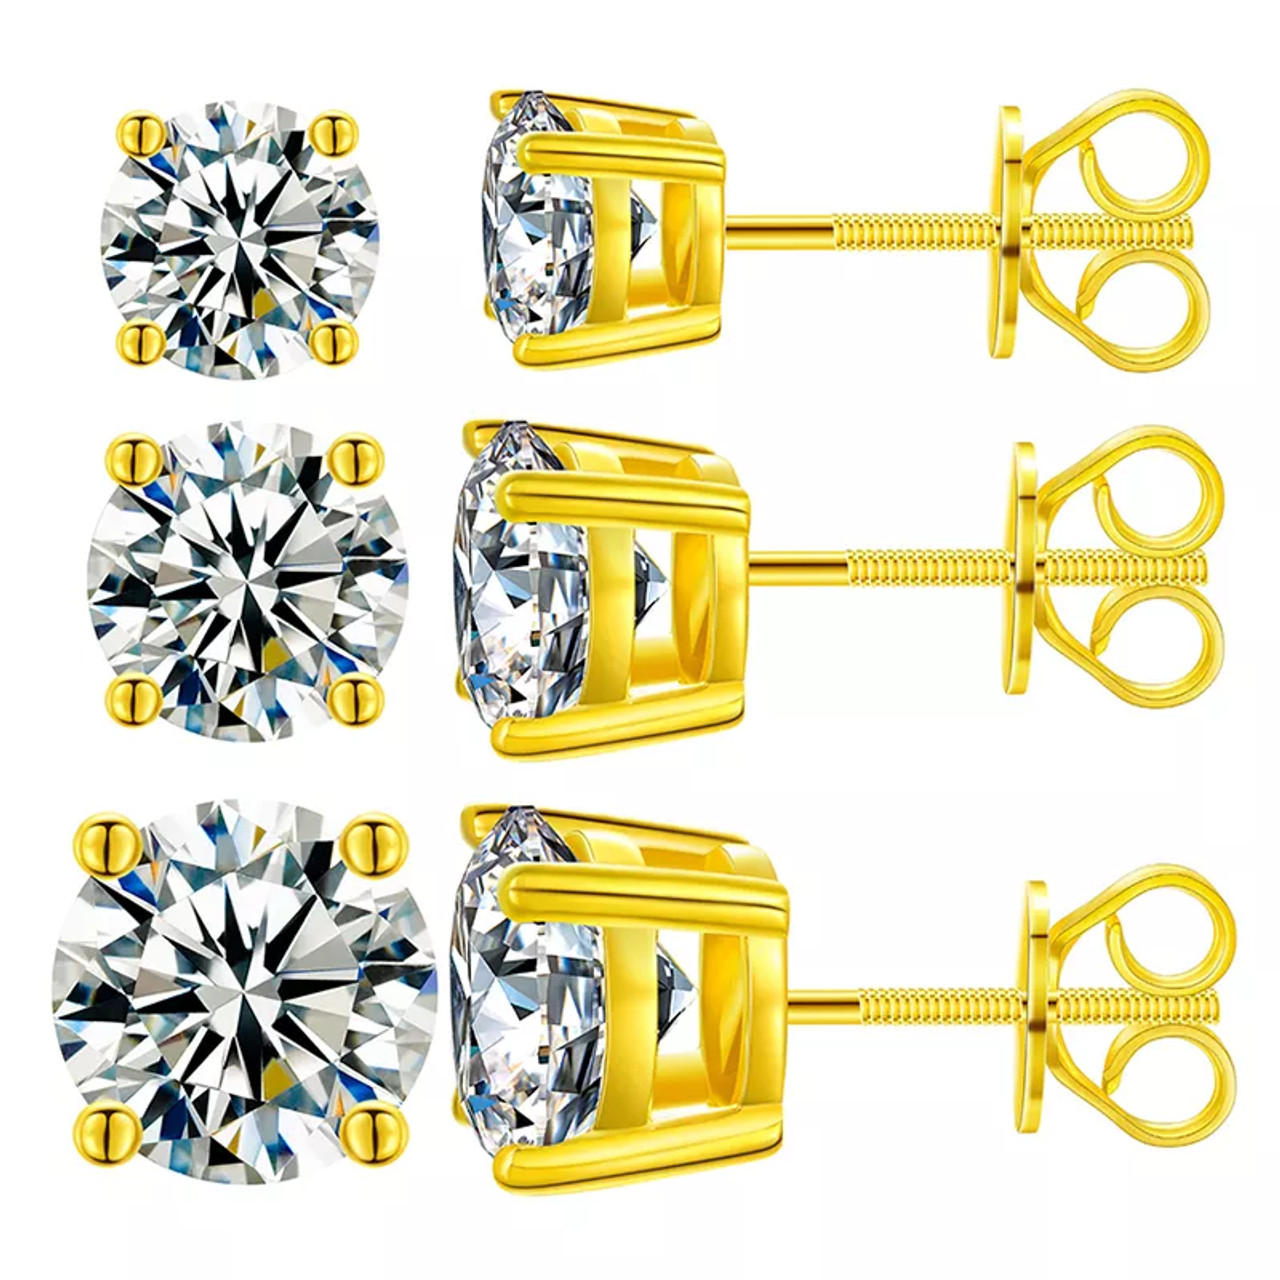 Moissanite Stud Earrings Screw Backs 1/5-Carat to 6-Carats with GRA Lab Certified D/VVS1 Moissanite Diamond Set in 18K Yellow Gold Plated 925 Sterling Silver Screwback Stud Earrings